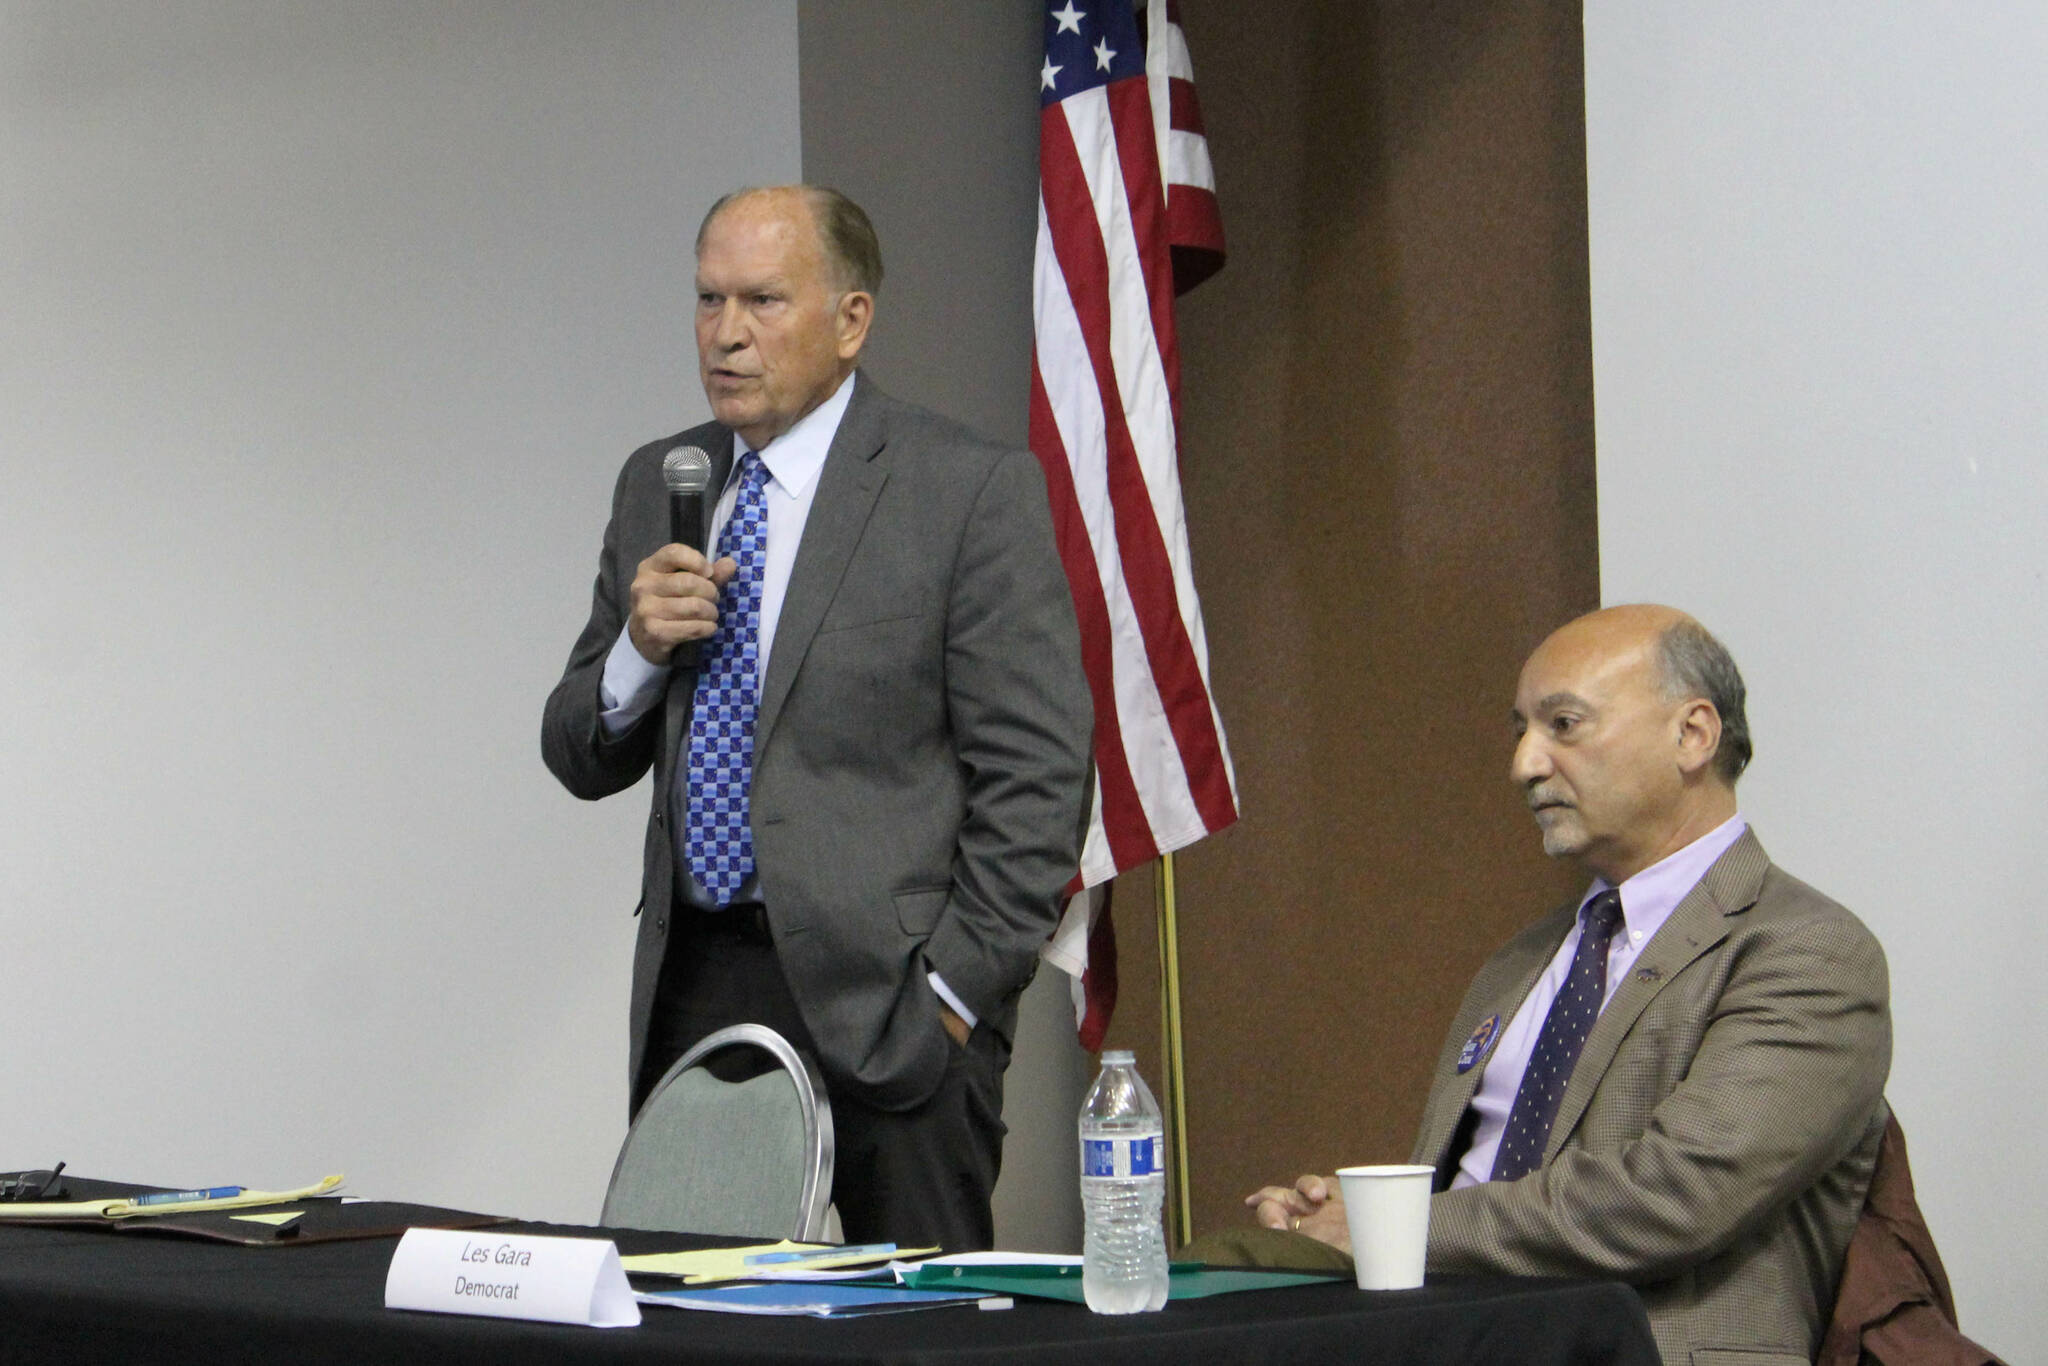 Alaska gubernatorial candidates Bill Walker, left, and Les Gara participate in a candidate forum hosted by the Kenai and Soldotna chambers of commerce at the Kenai Chamber of Commerce and Visitor Center on Wednesday, Sept. 7, 2022, in Kenai, Alaska. (Ashlyn O’Hara/Peninsula Clarion)